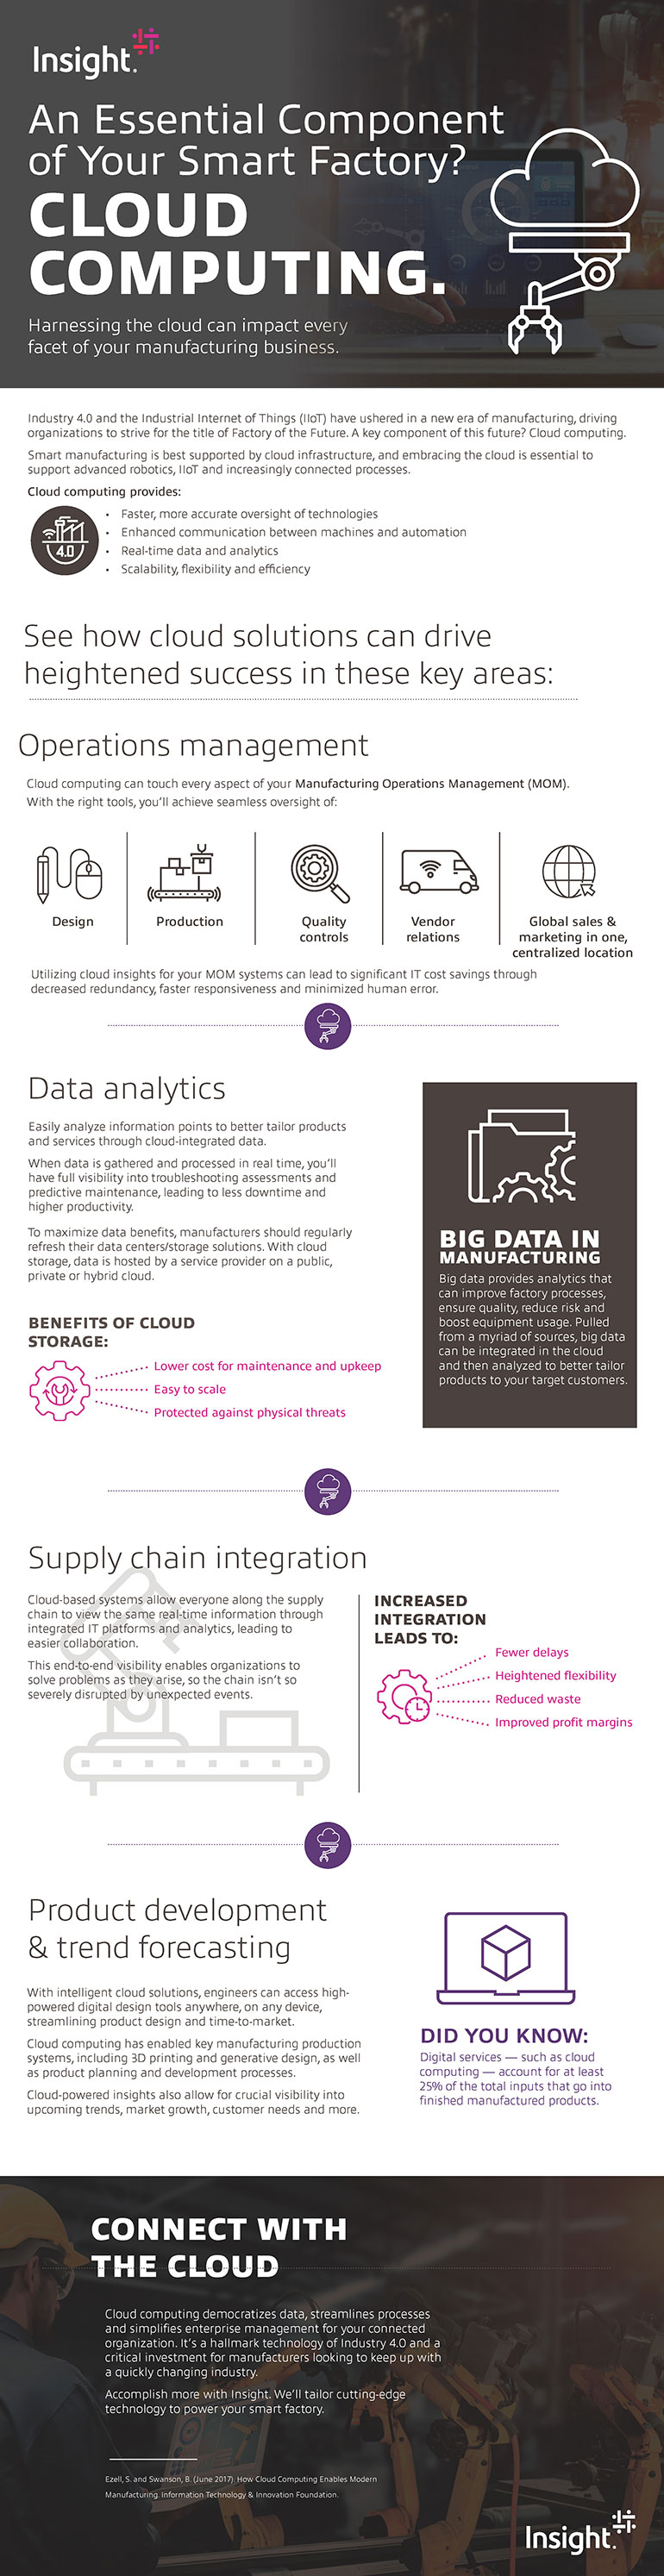 Cloud Computing in Manufacturing  infographic as transcribed below